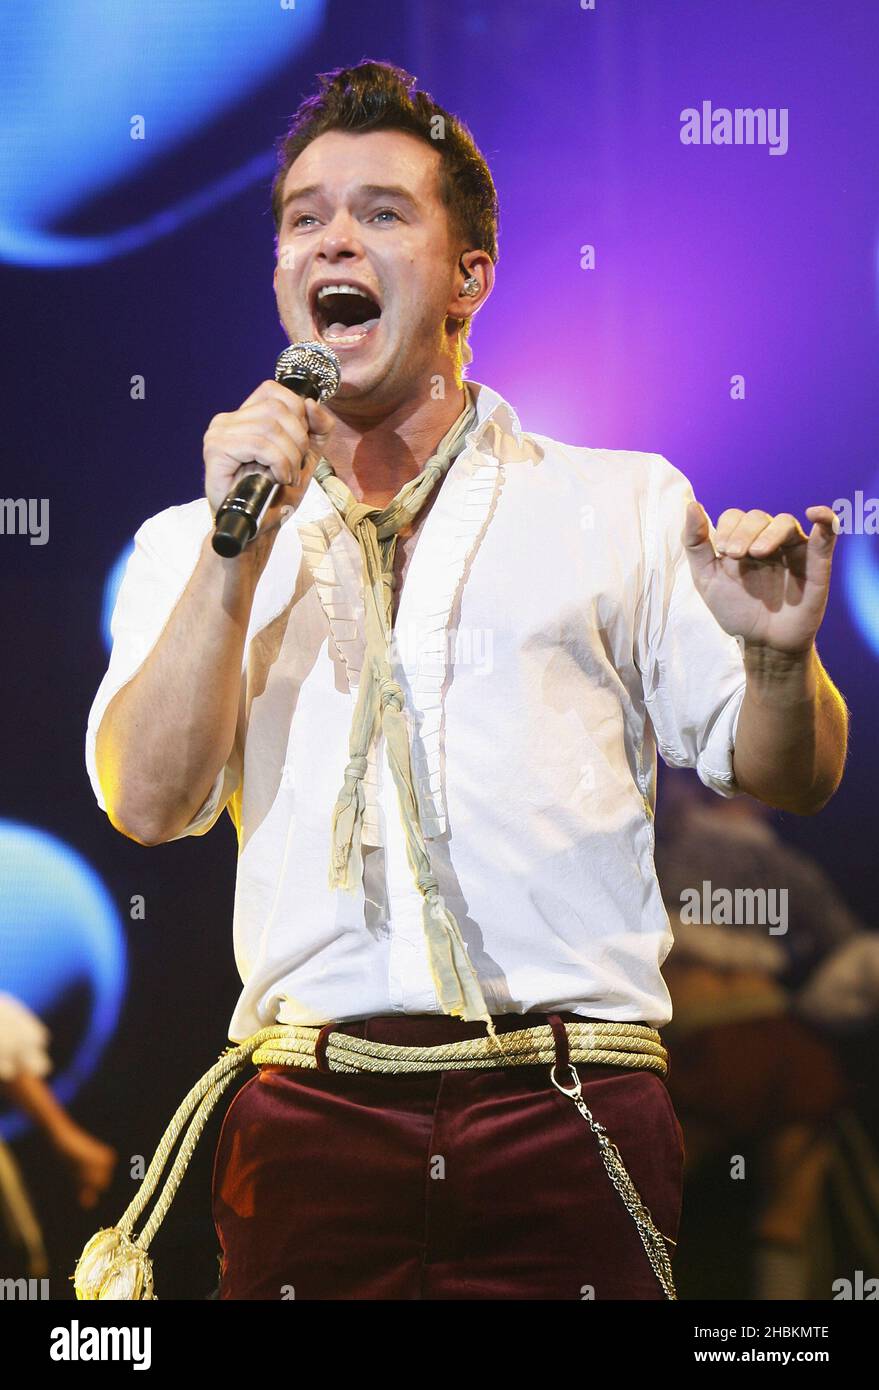 Stephen Gately of Boyzone performs at Wembley Arena, London Stock Photo